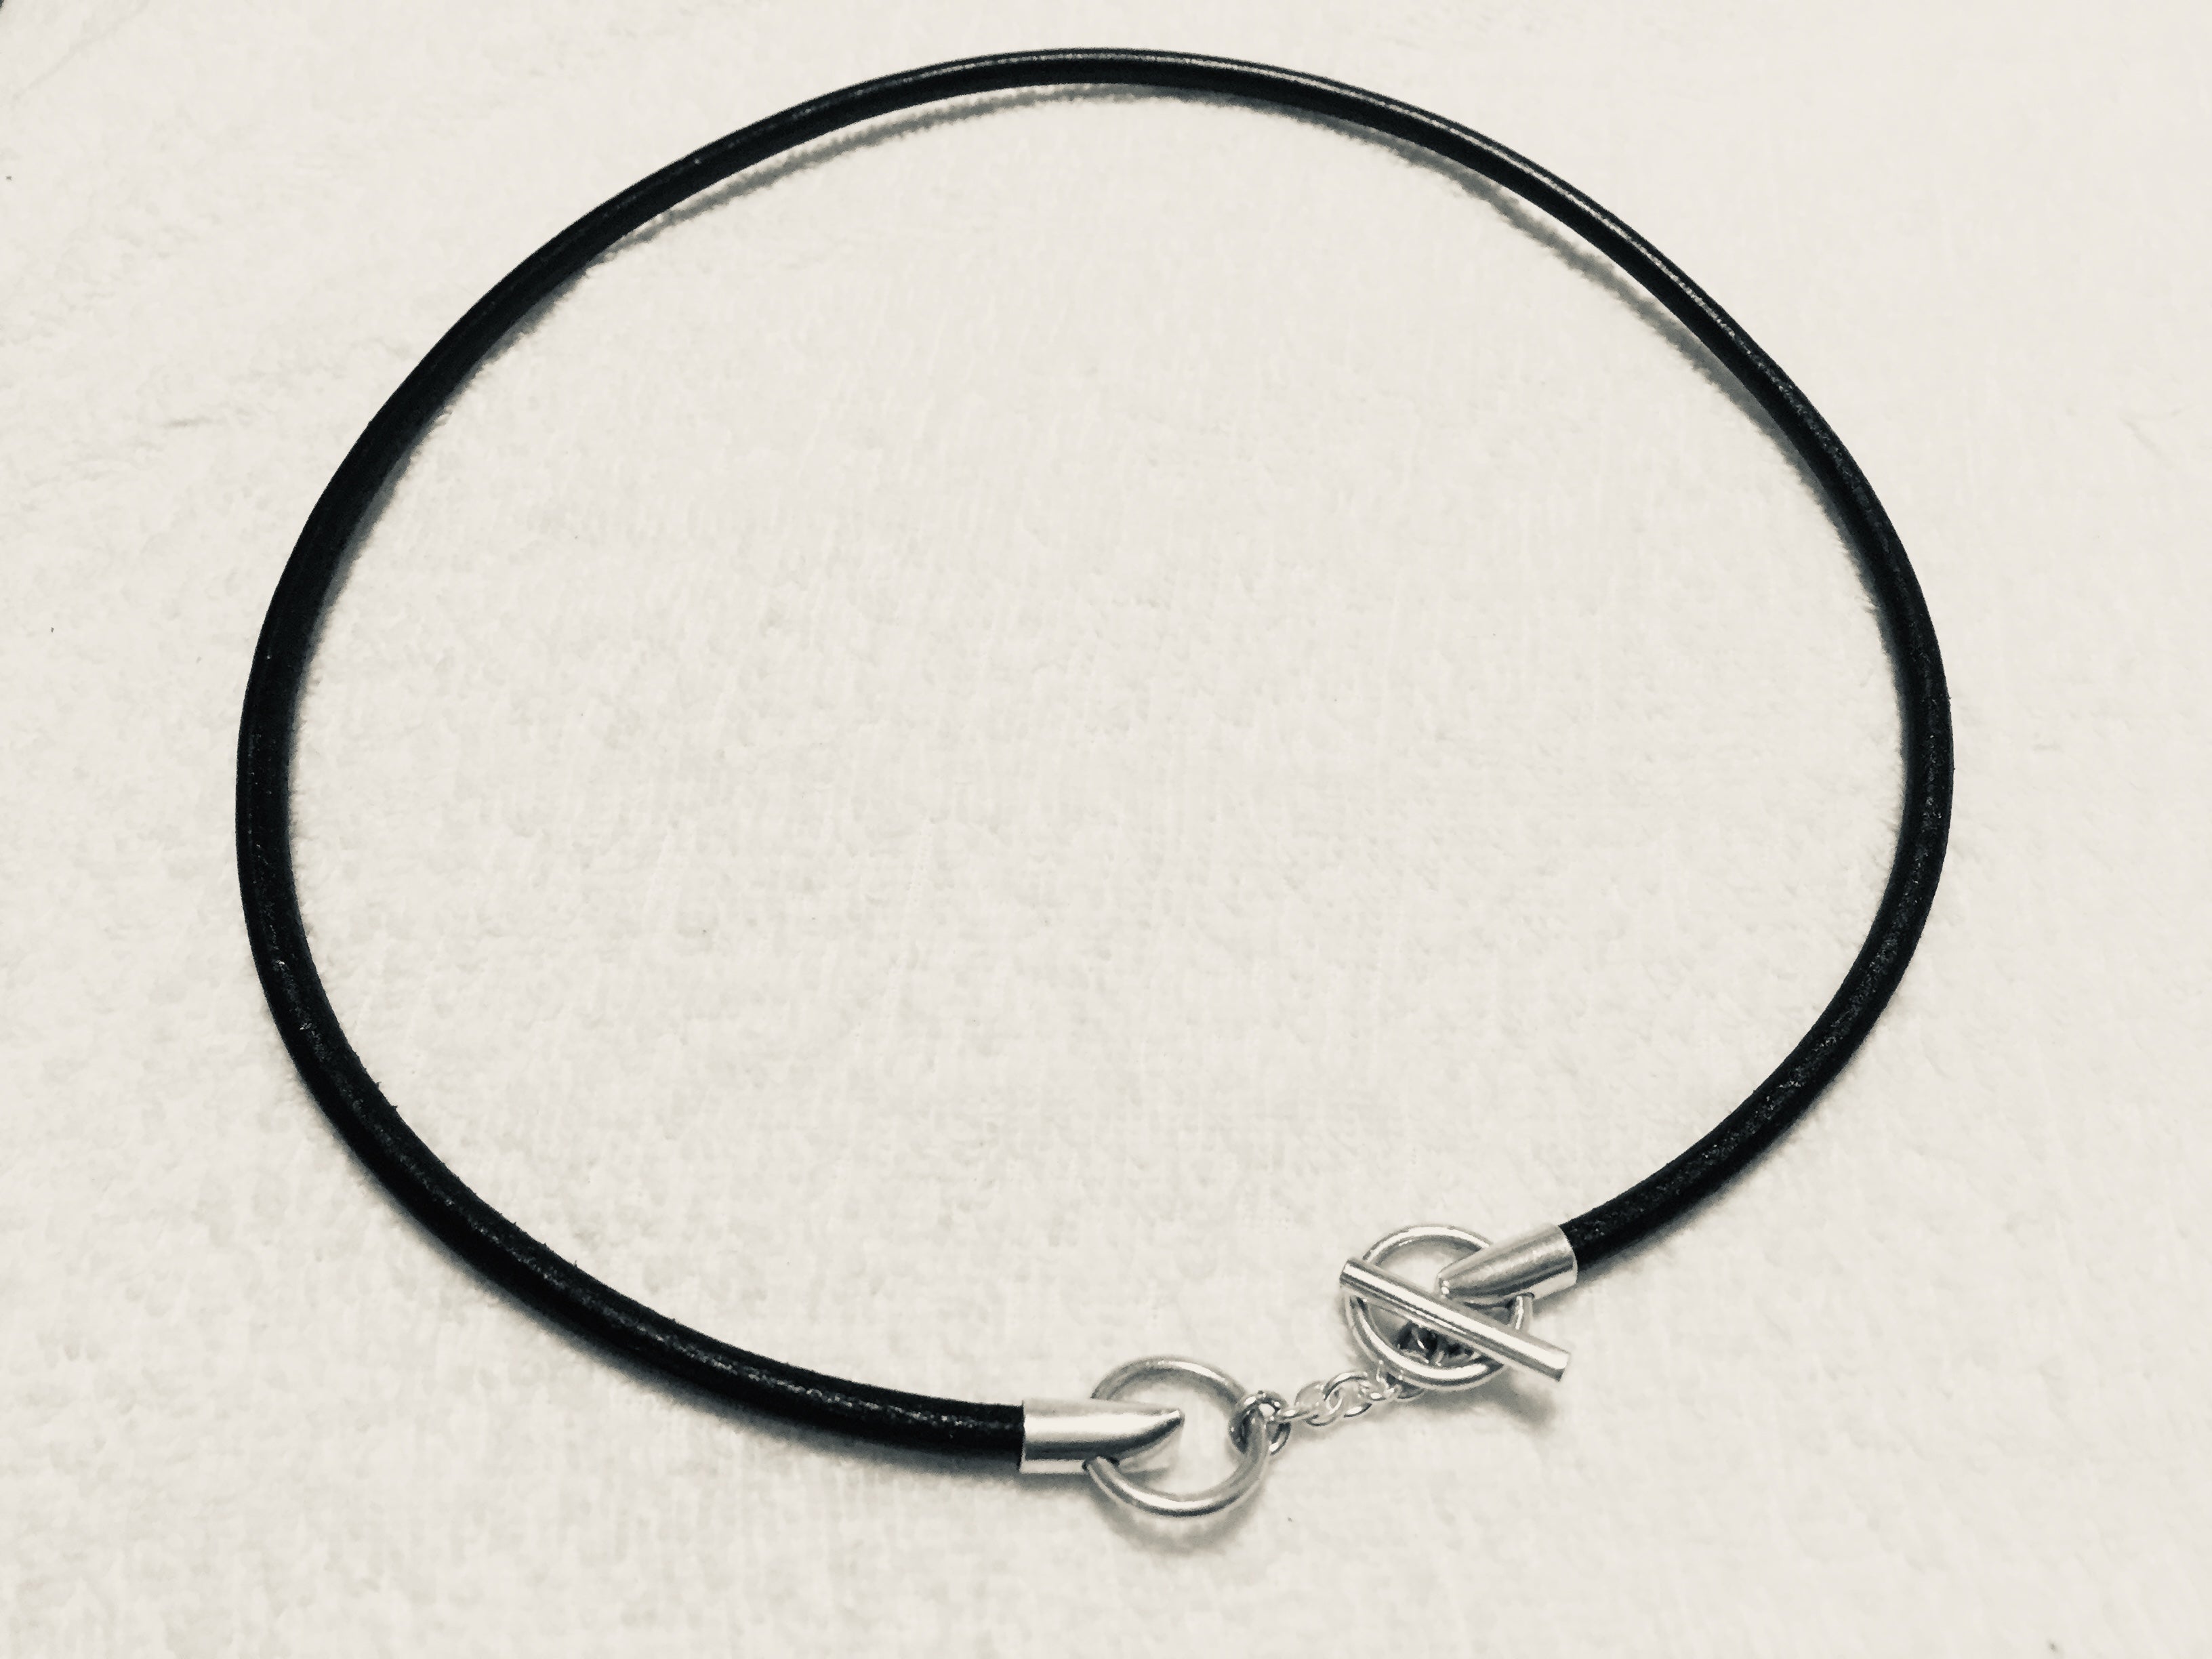 Combination Sterling Silver925 Bit and Natural Leather Cord Choker For Men  & Women ユニセックス・本革・シルバー・馬具銜・レザーチョーカー